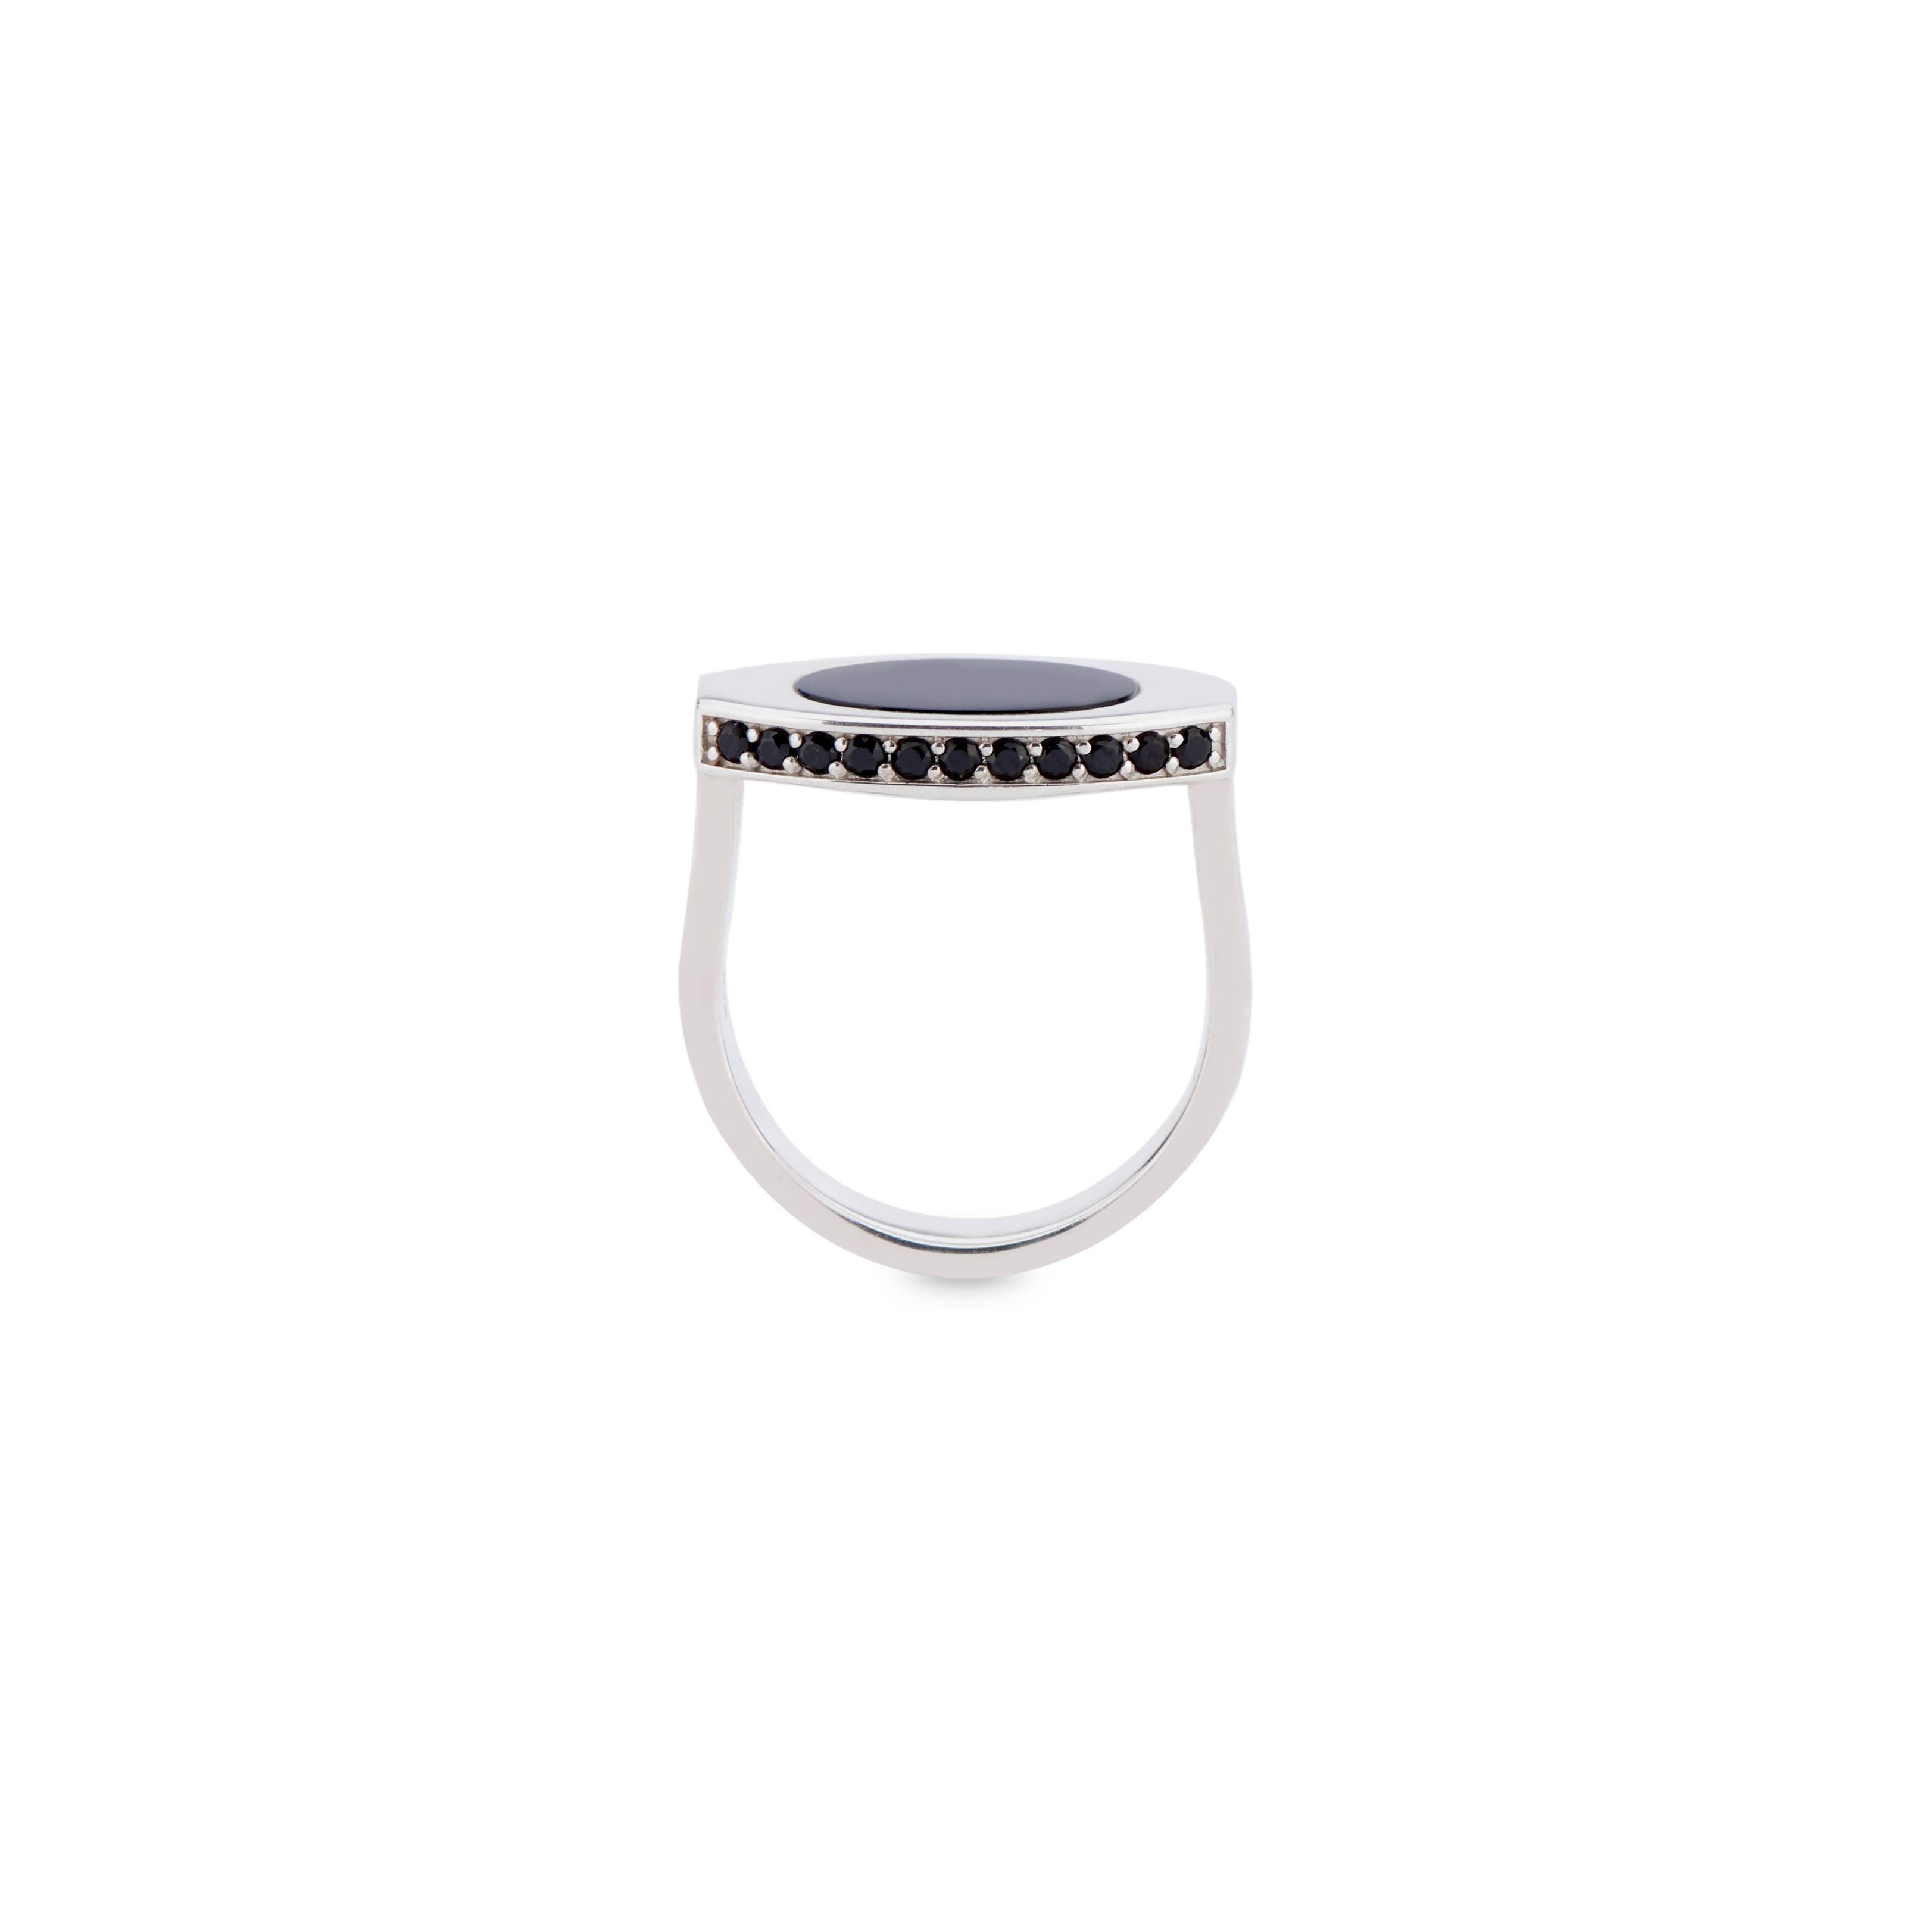 The sterling silver Black Onyx Signet has a chic oblong shape that complements all fingers.  It features a cabochon black onyx set into the top of the signet and pavé black onyx around the edges.

This ring comes in all metals and can be made in any